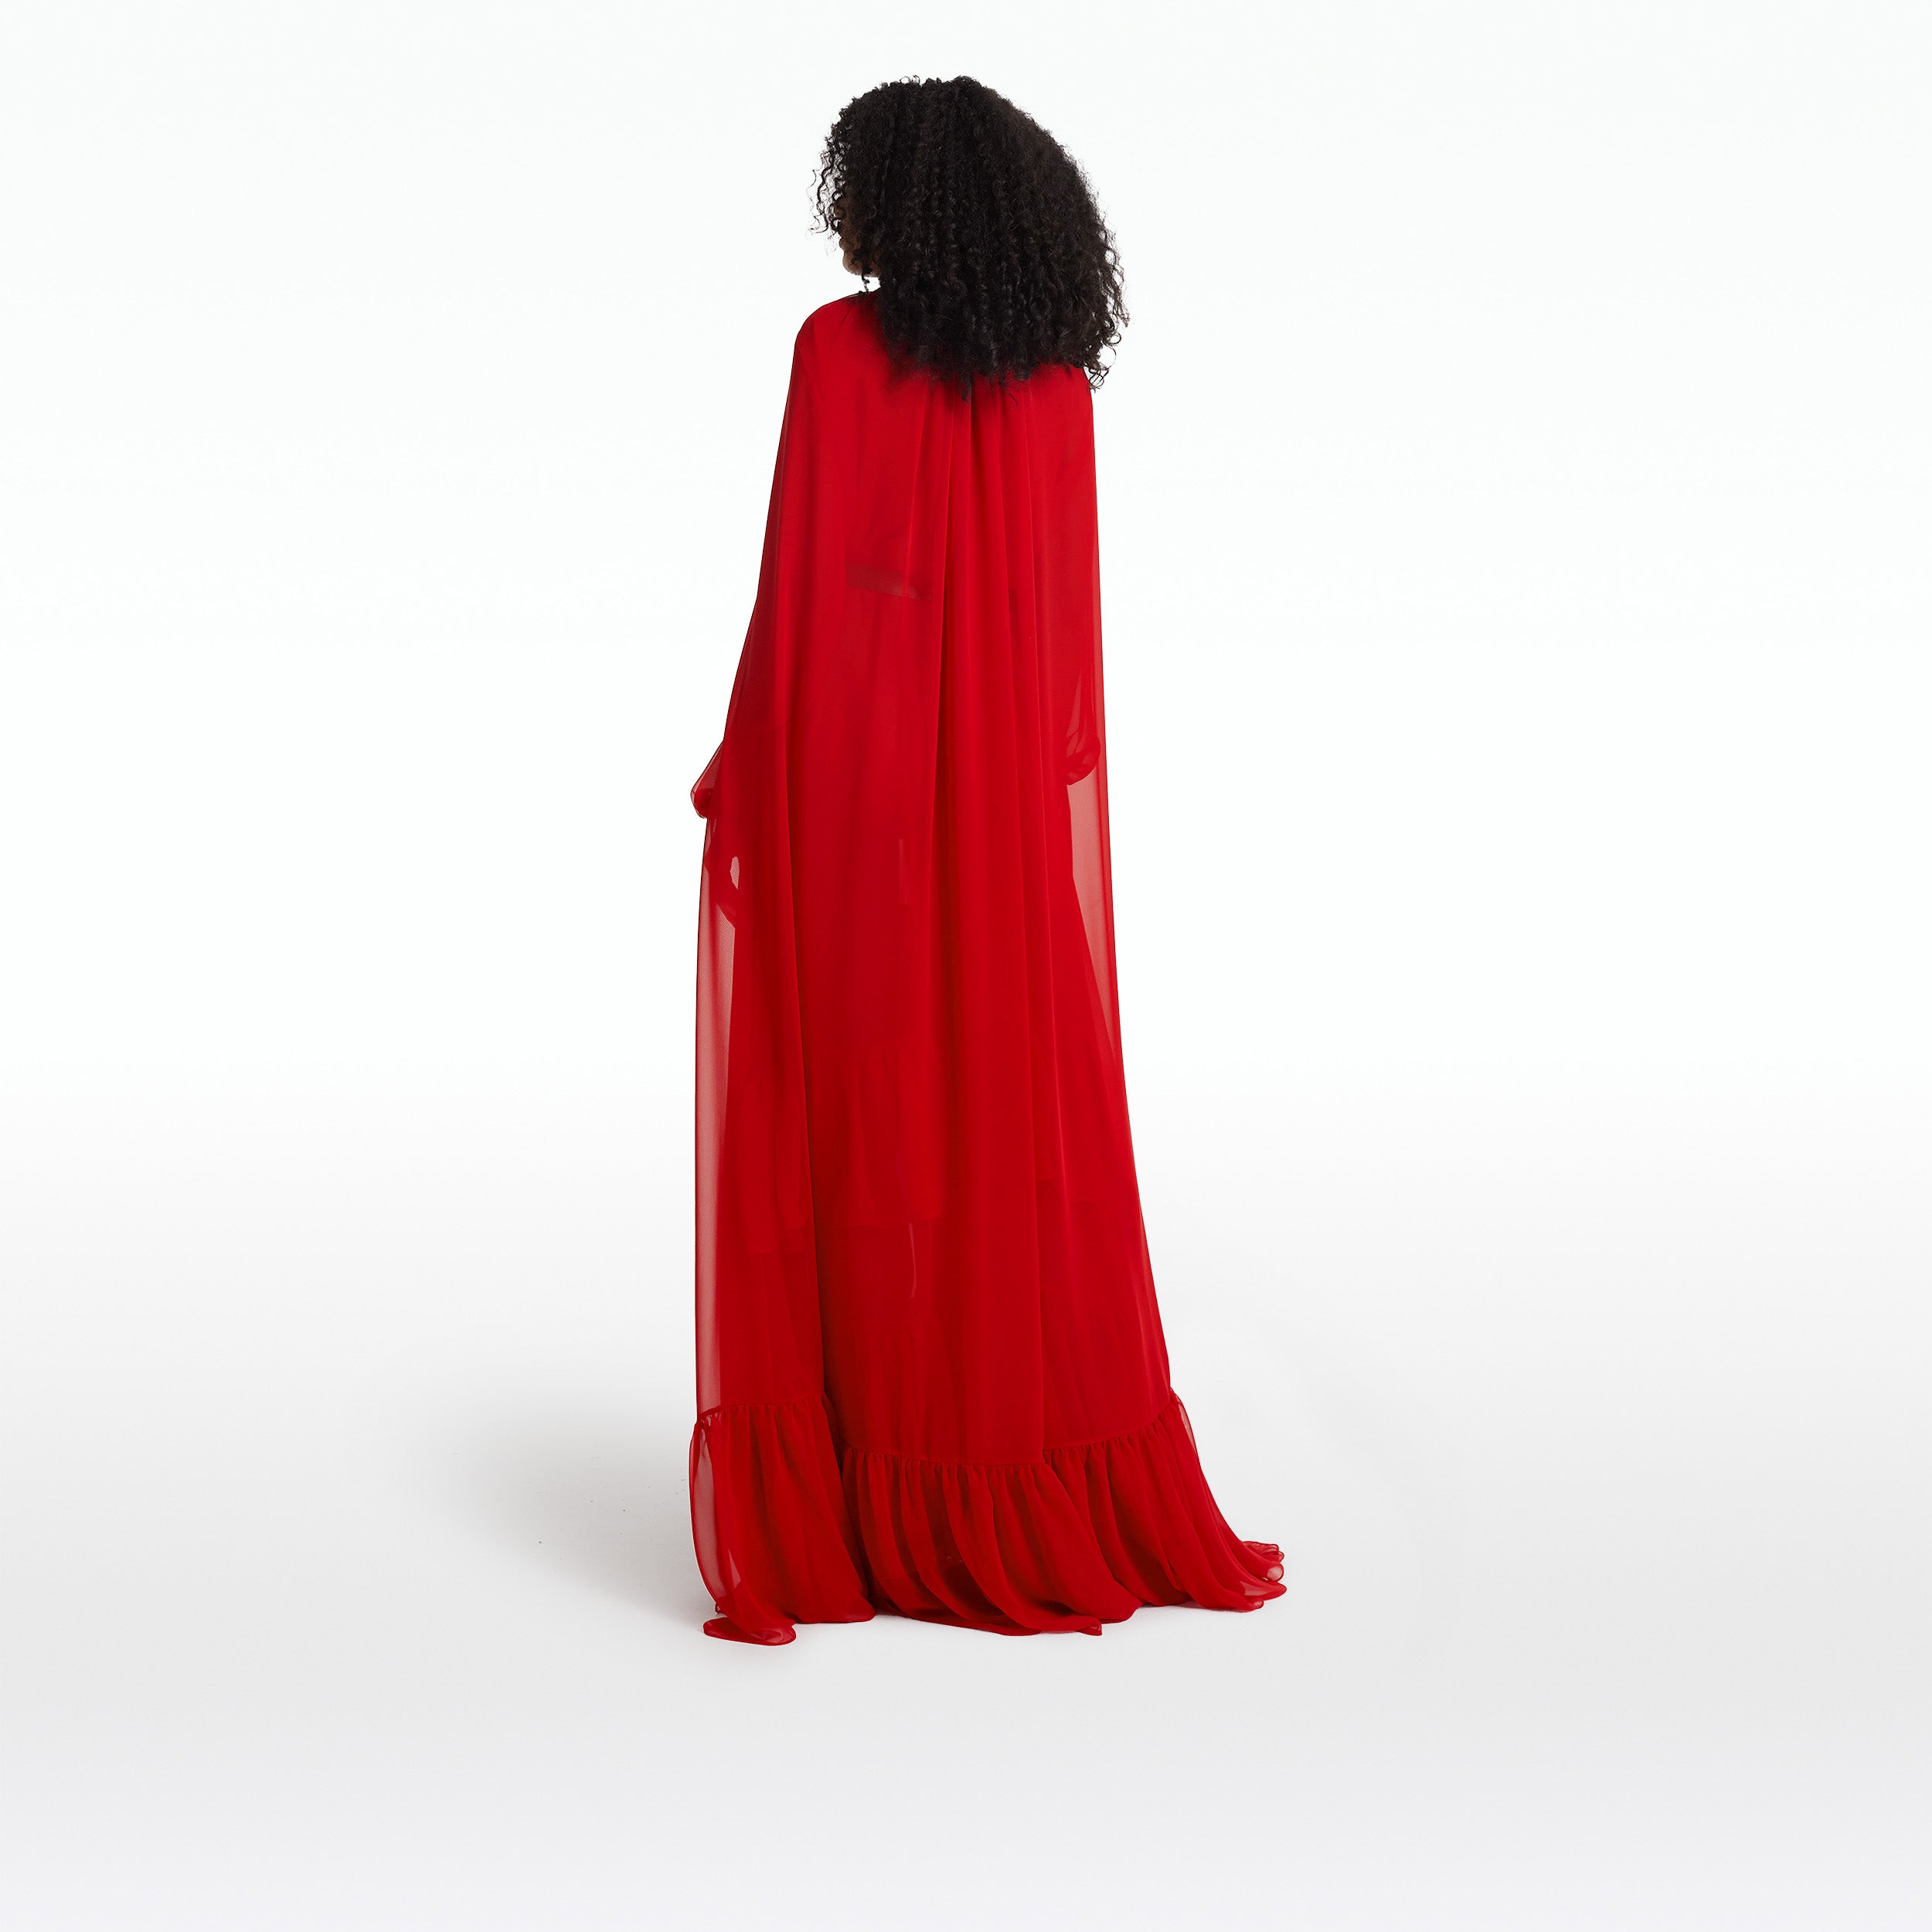 Affie Lacquer Red Cape